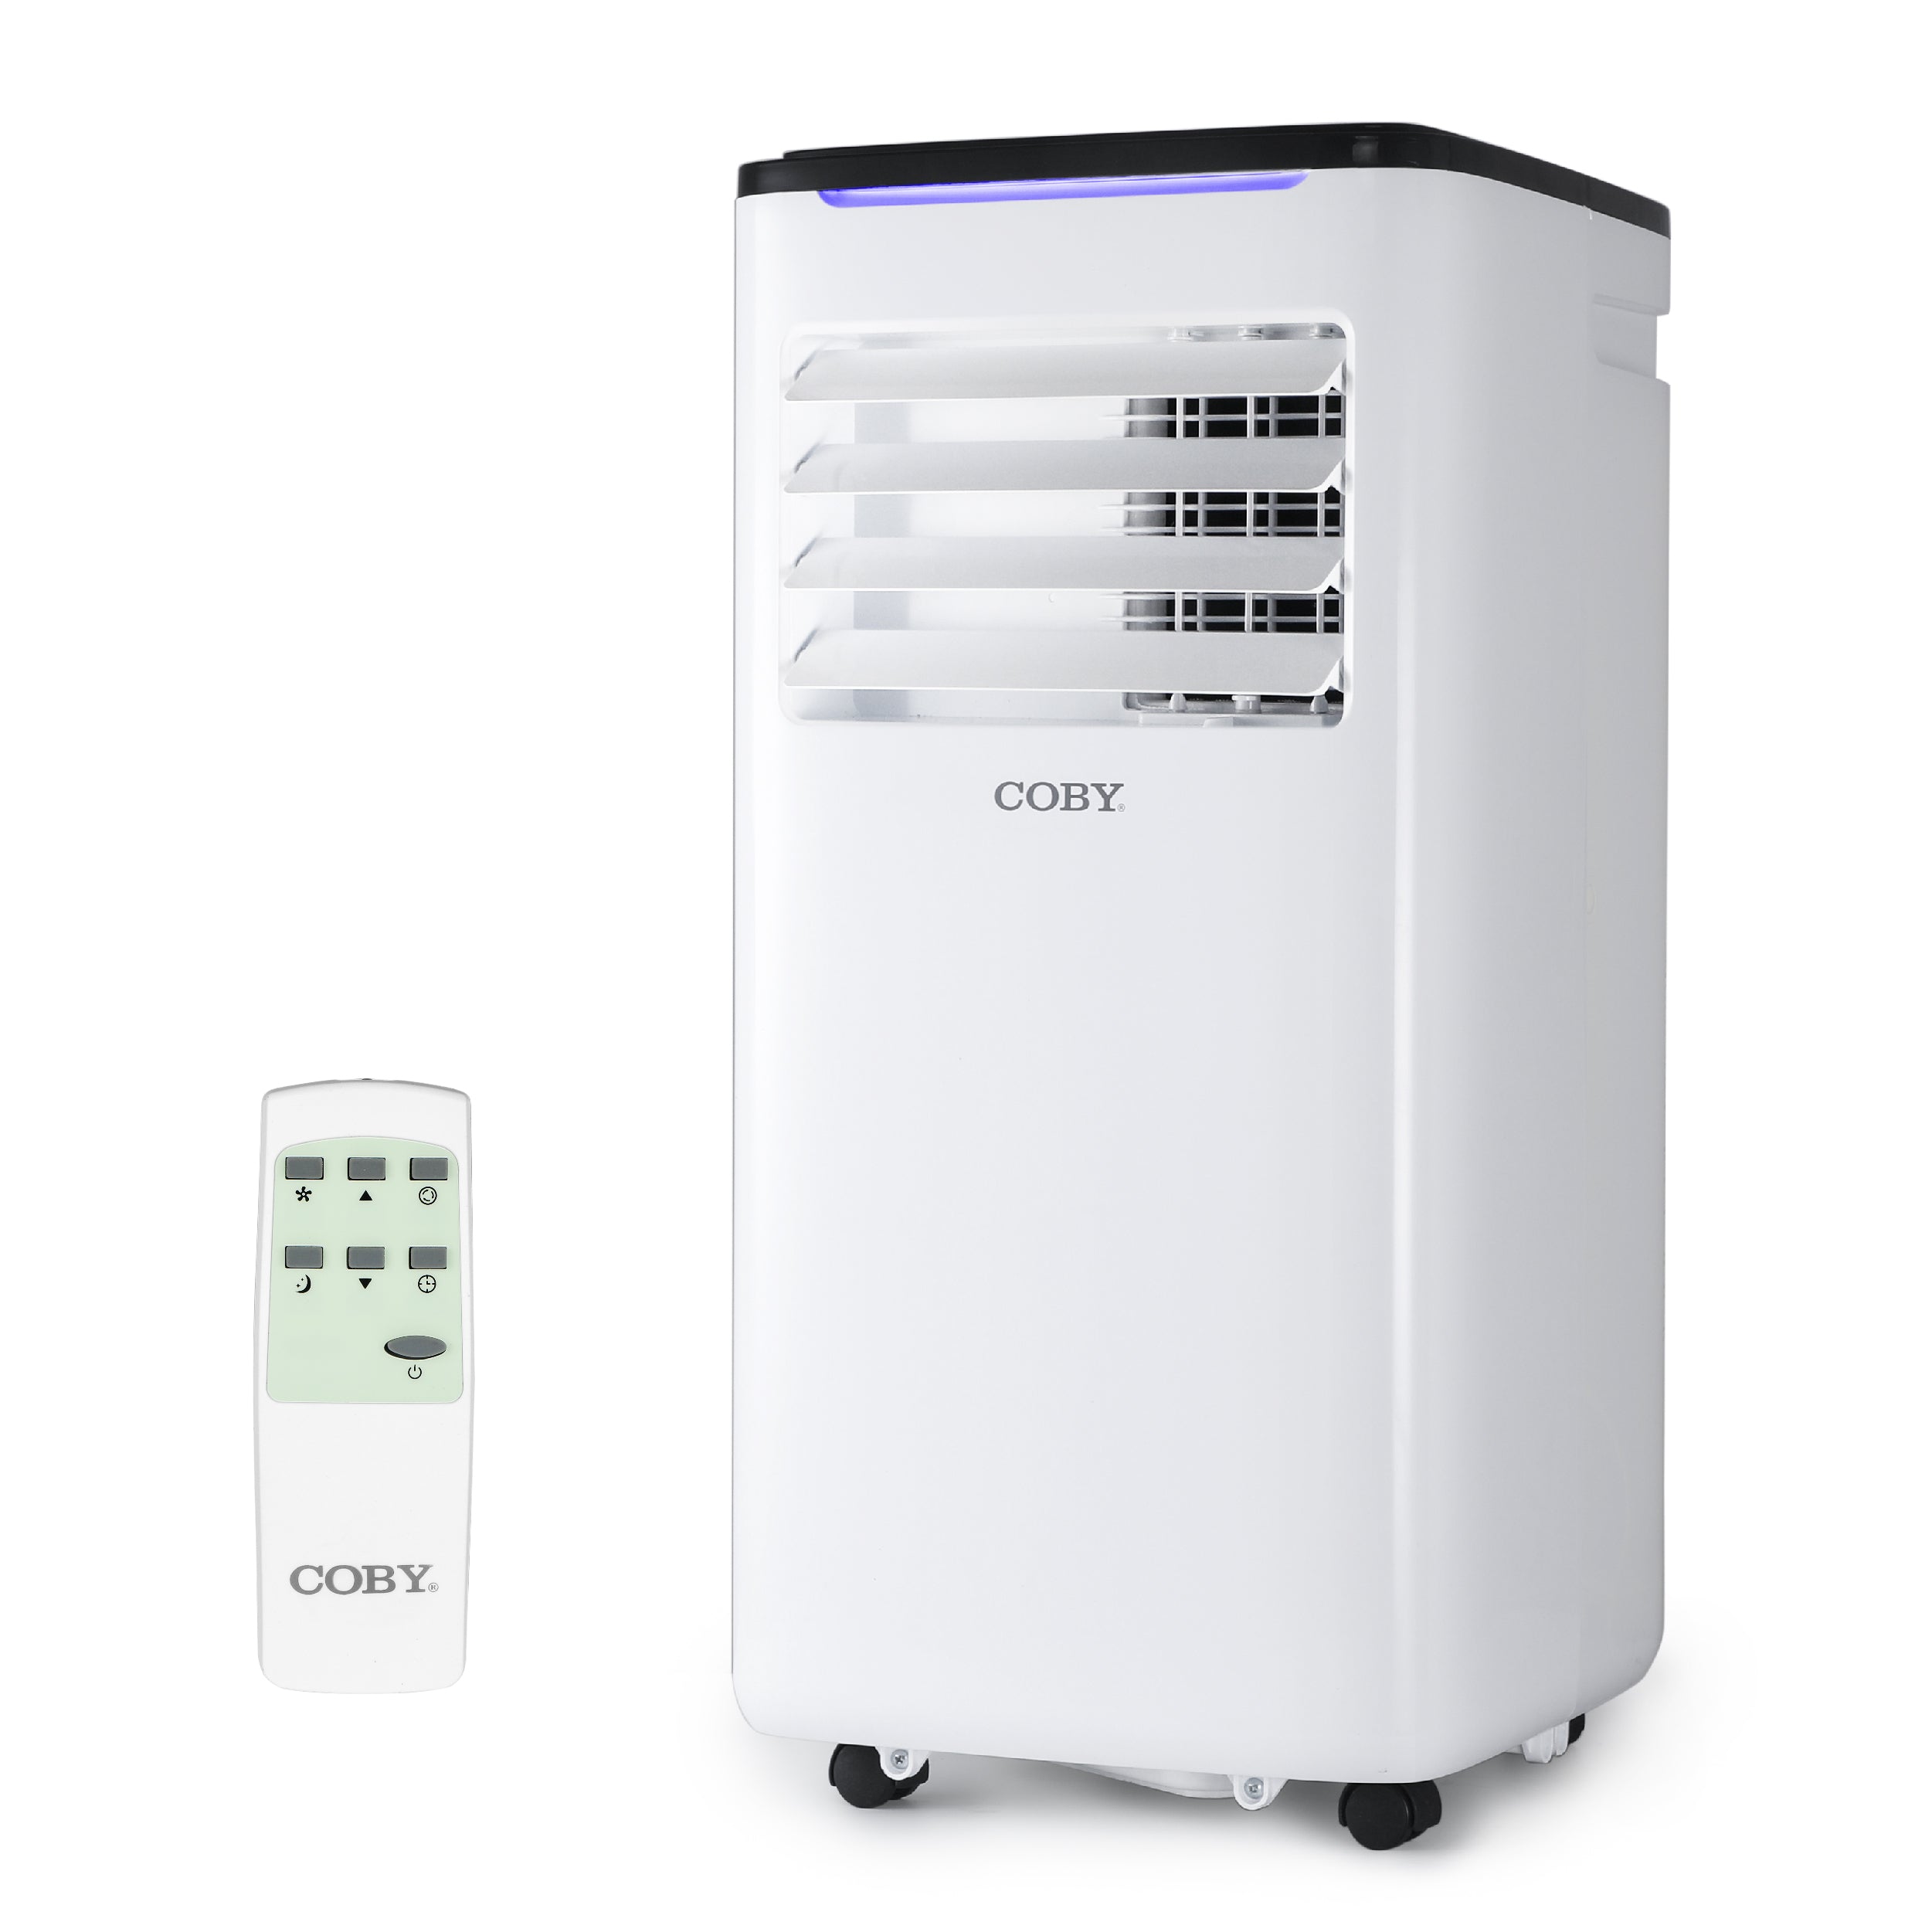 COBY Portable Air Conditioner 3-in-1 AC Unit, Dehumidifier & Fan, Air Conditioner 9,000 BTU Portable AC Unit for 400 Sq. Ft. with Remote Control, 24-Hour Timer, & Installation Kit